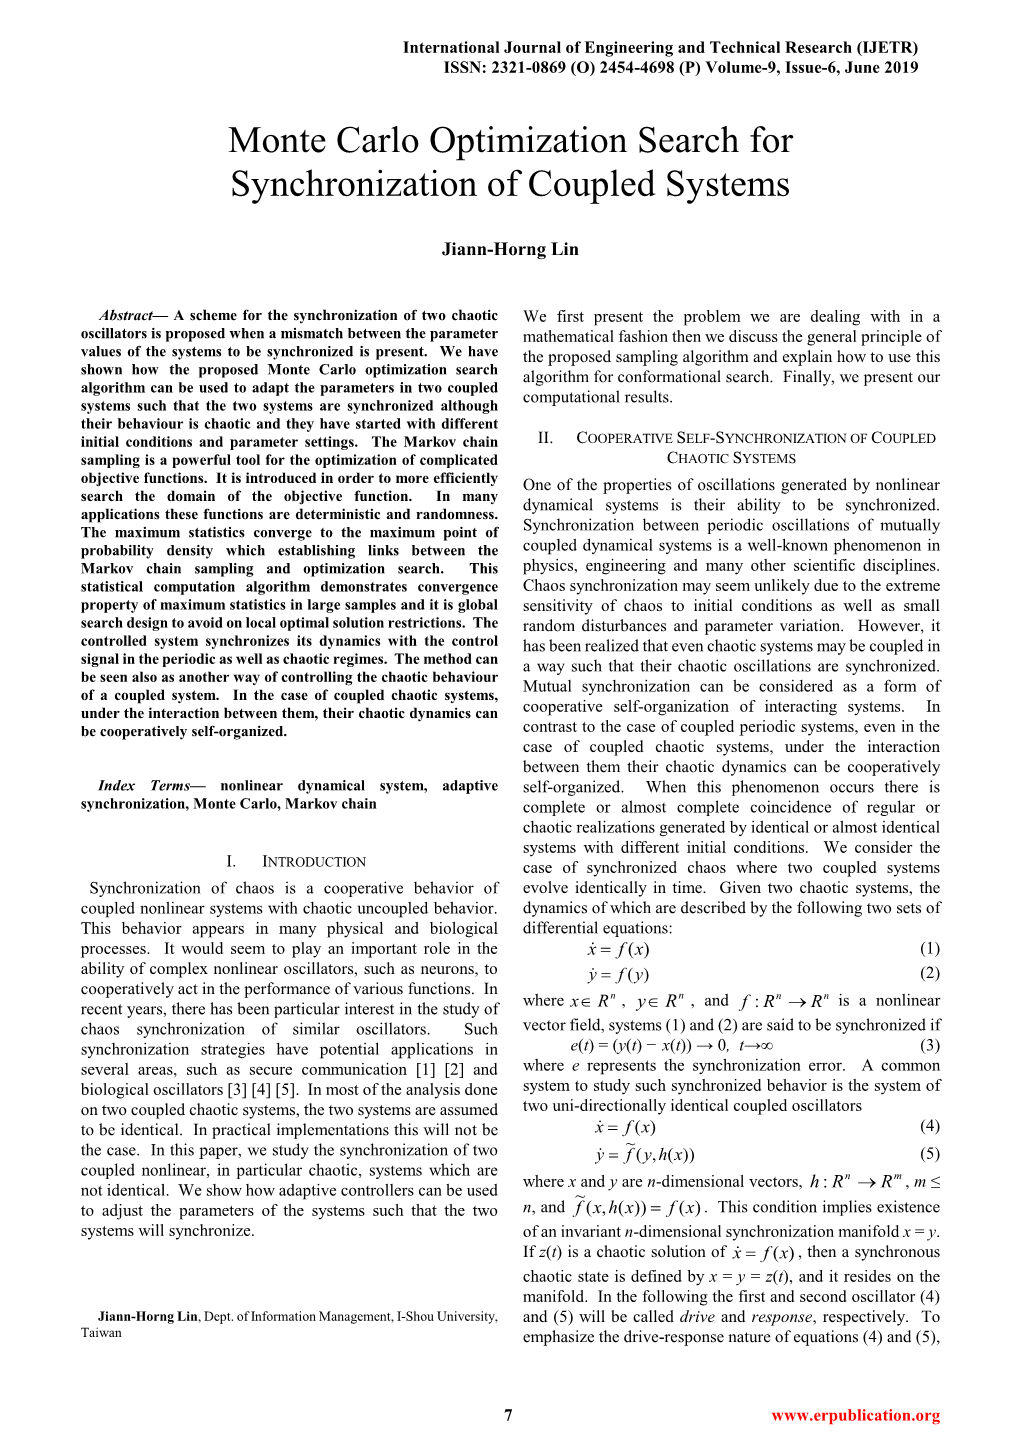 Monte Carlo Optimization Search for Synchronization of Coupled Systems